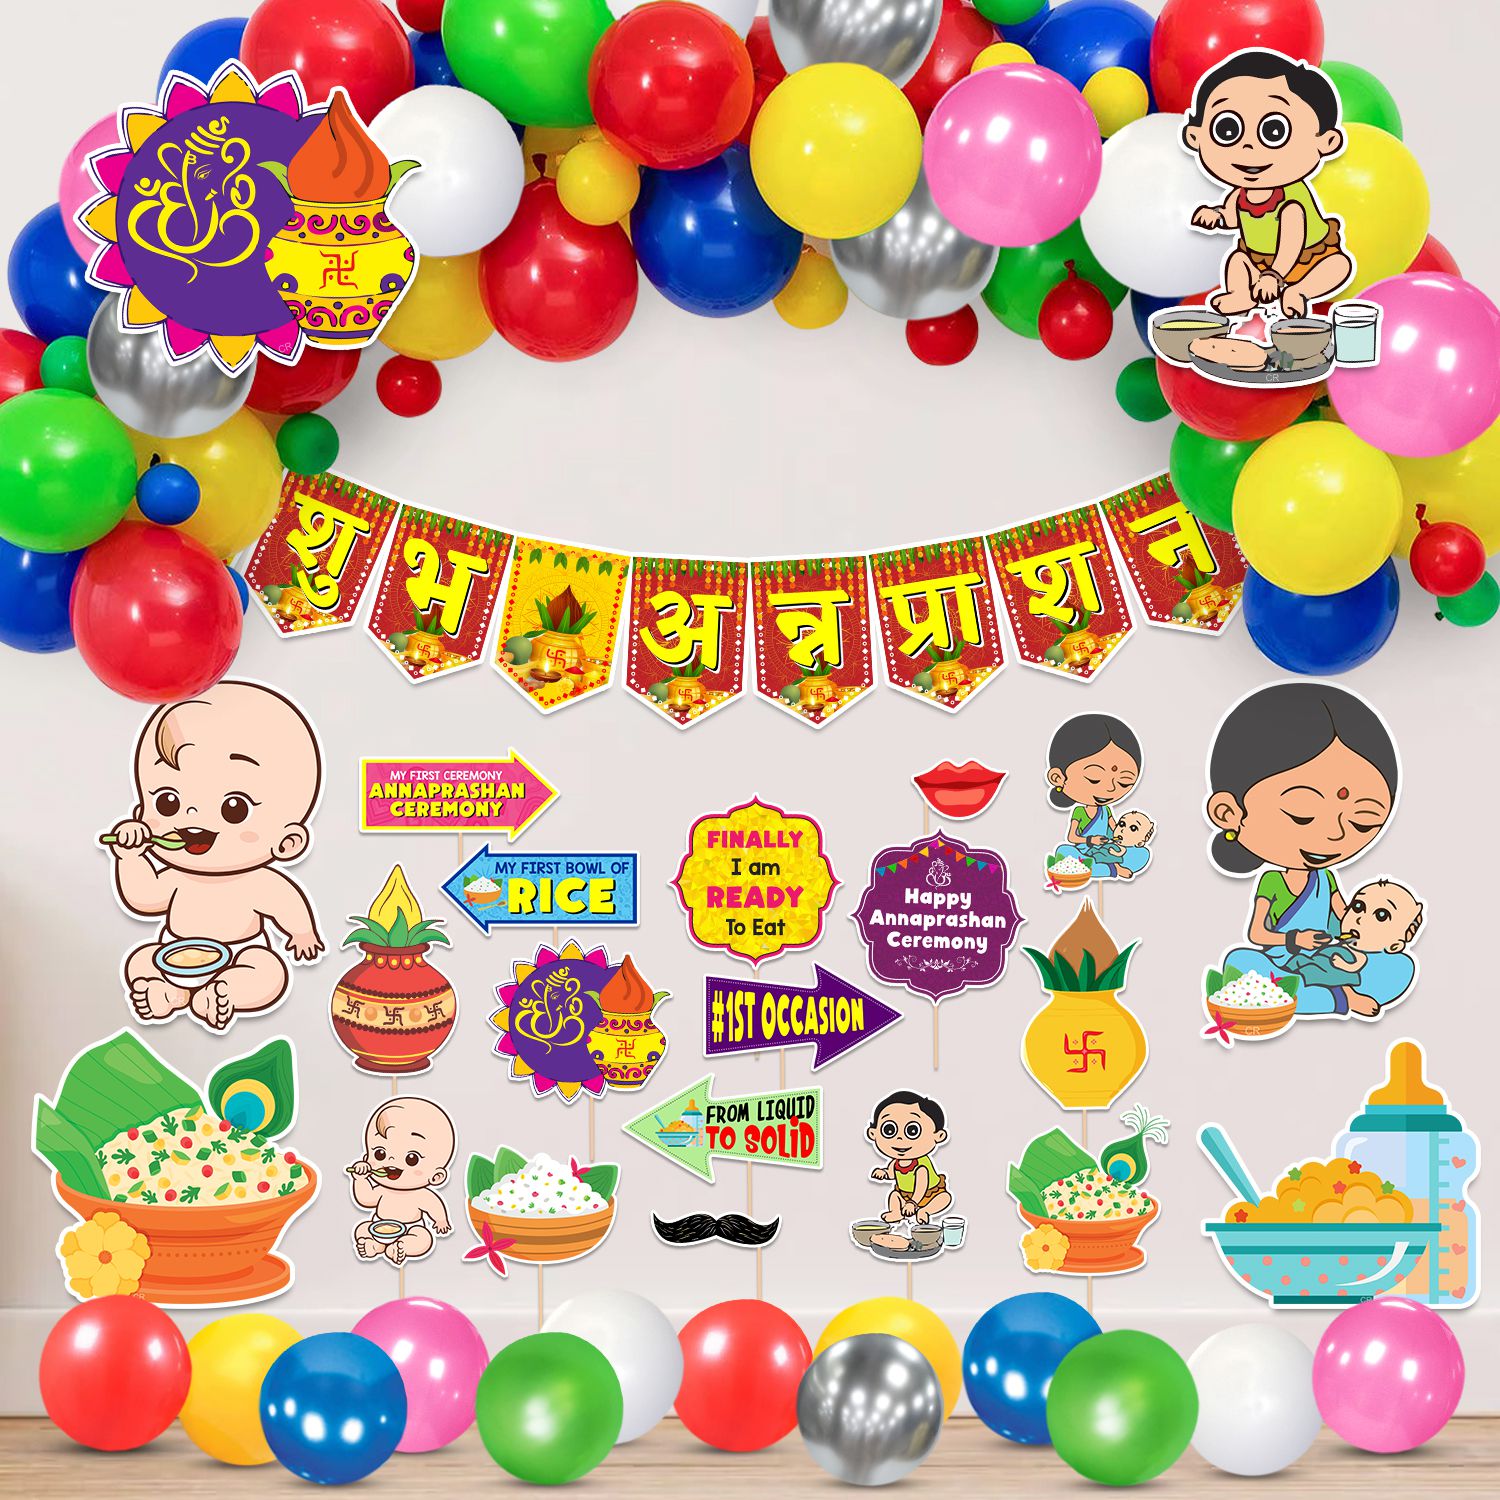     			Zyozi Annaprasanam Cardstock Cutout with Annaprasanam Bunting Banner Hindi Font Shubh Annaprashan Yellow & Red Color Font and Balloon,Photo Booth Props (Pack of 65)